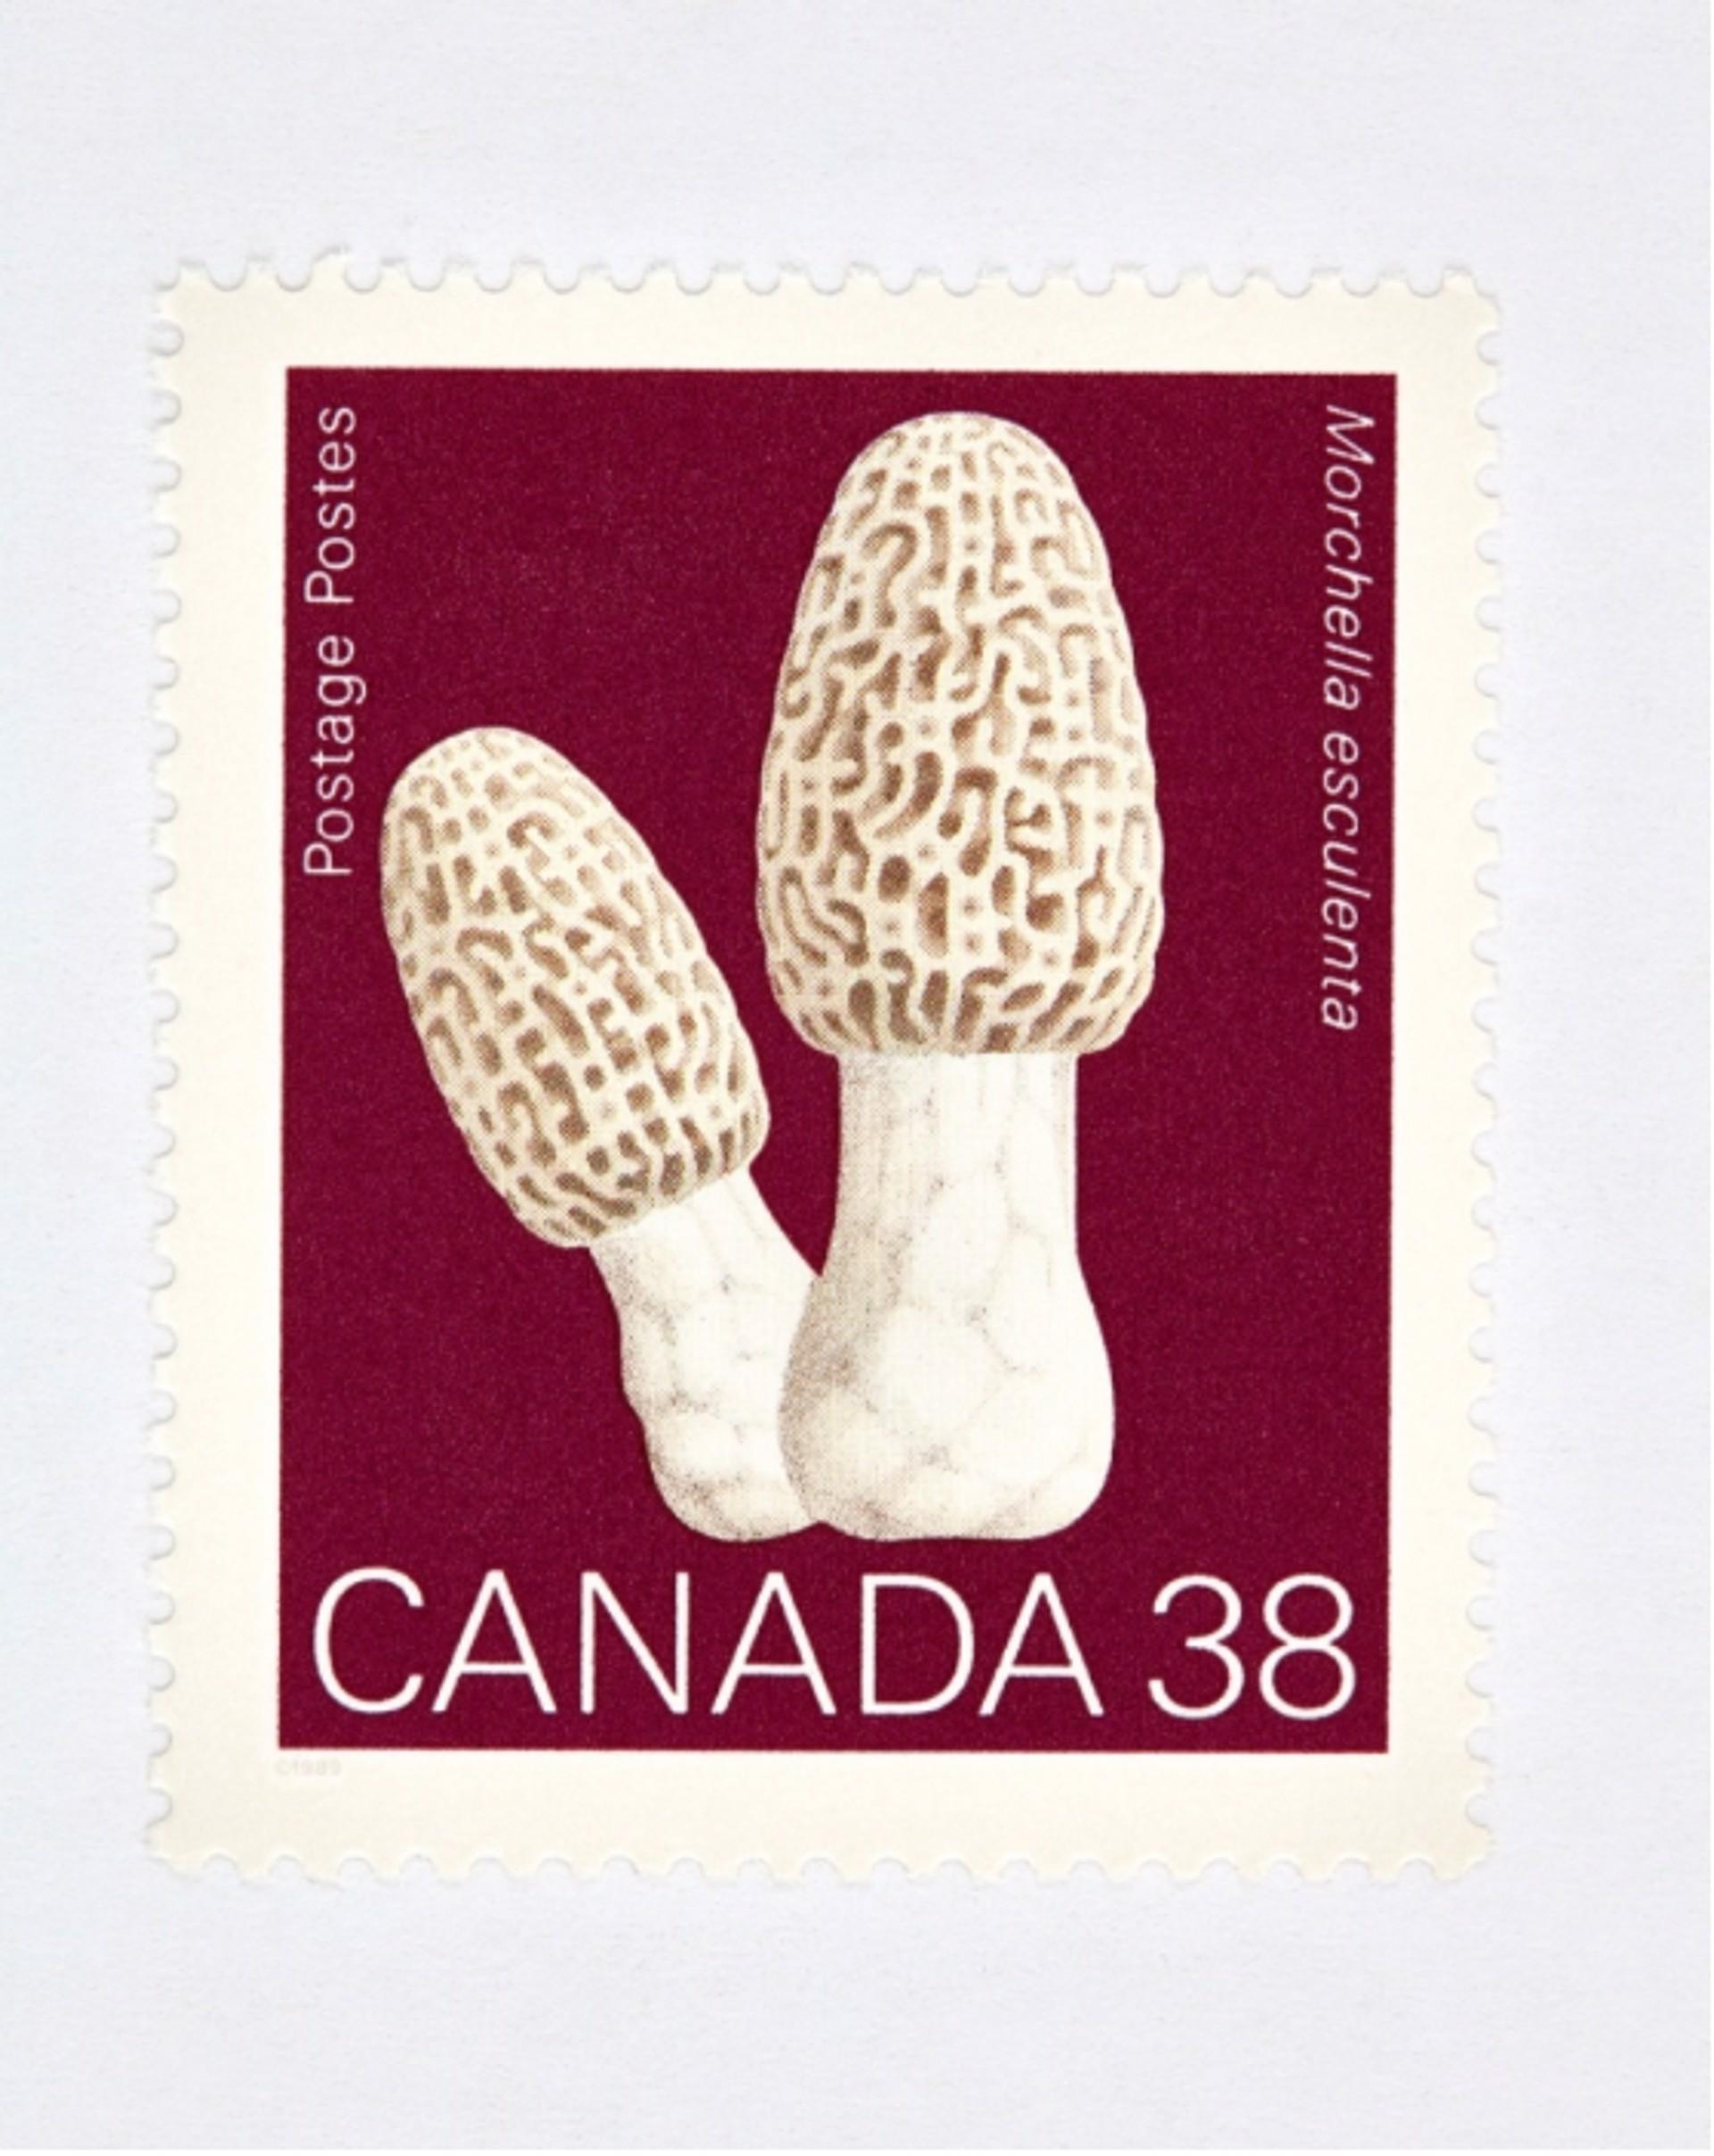 Peter Andrew Lusztyk - Canada 38 Mushroom (Red), Photography 2021, Printed After